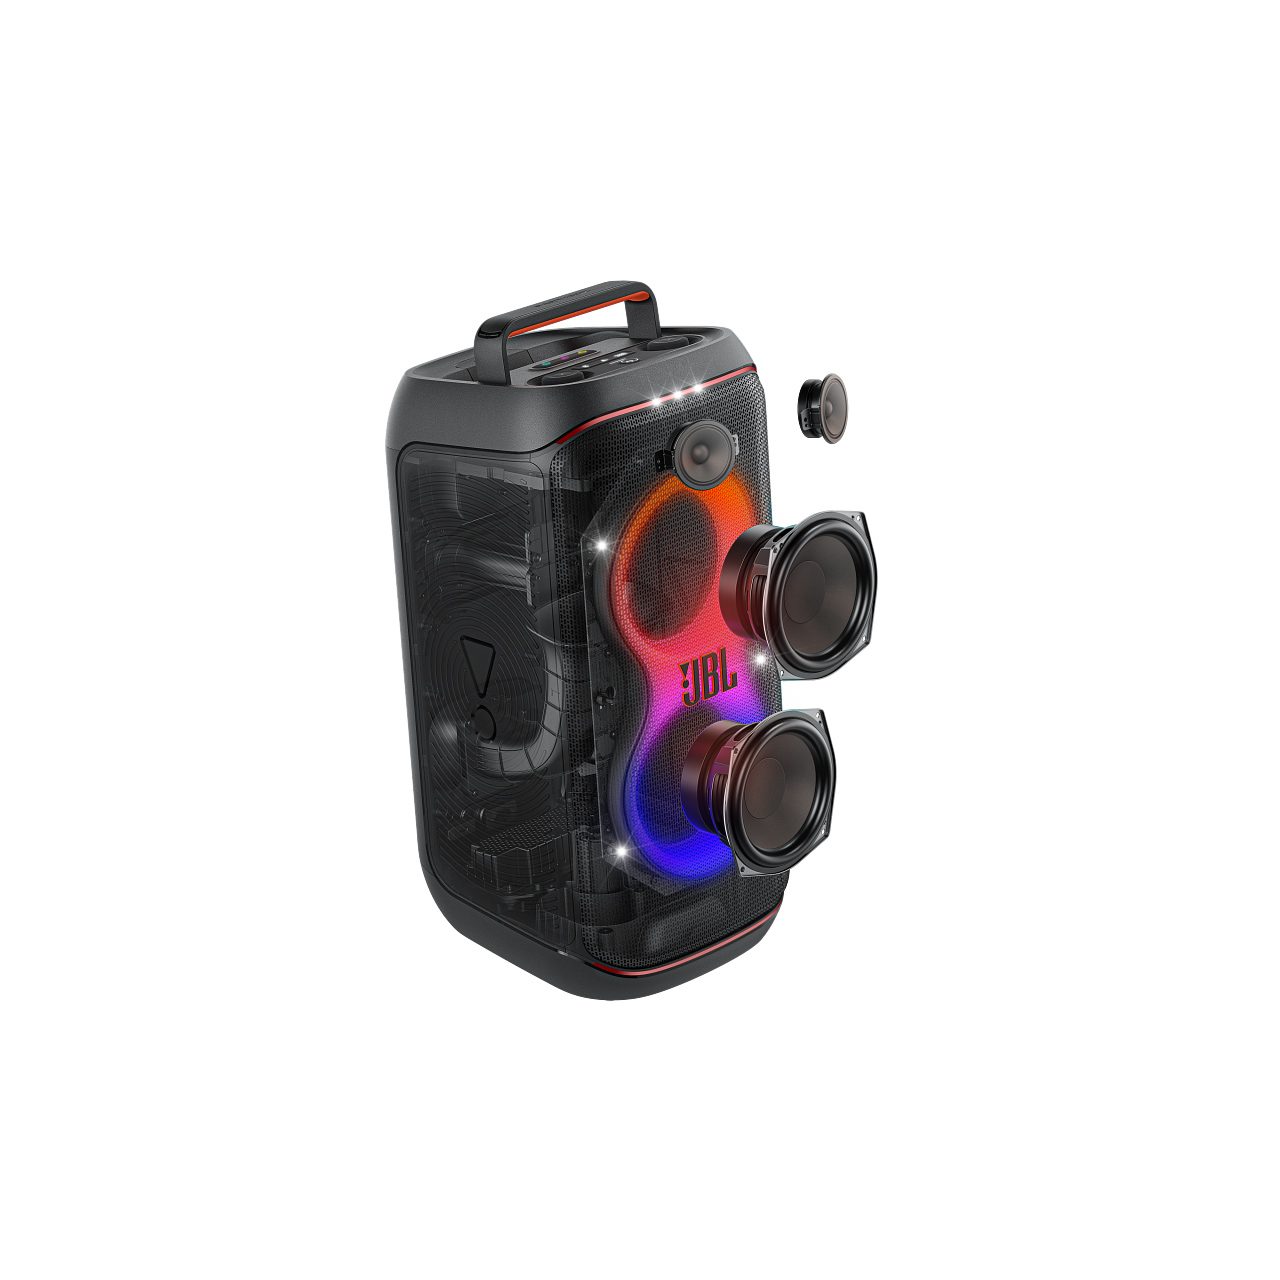 Partybox Club 120, Bluetooth Party Speaker